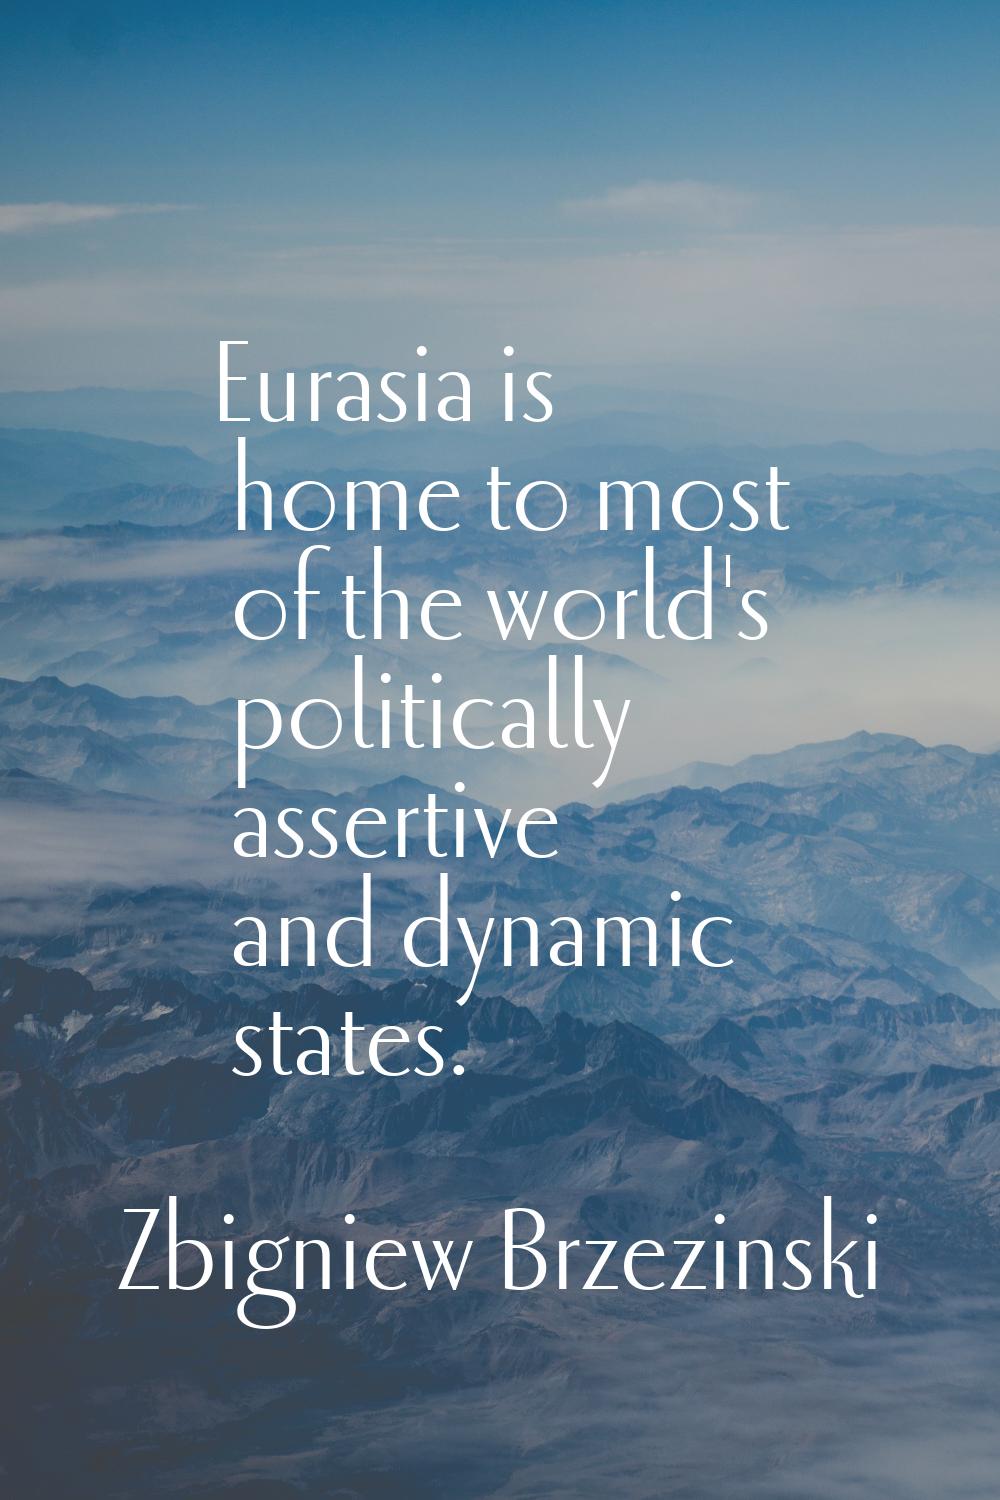 Eurasia is home to most of the world's politically assertive and dynamic states.